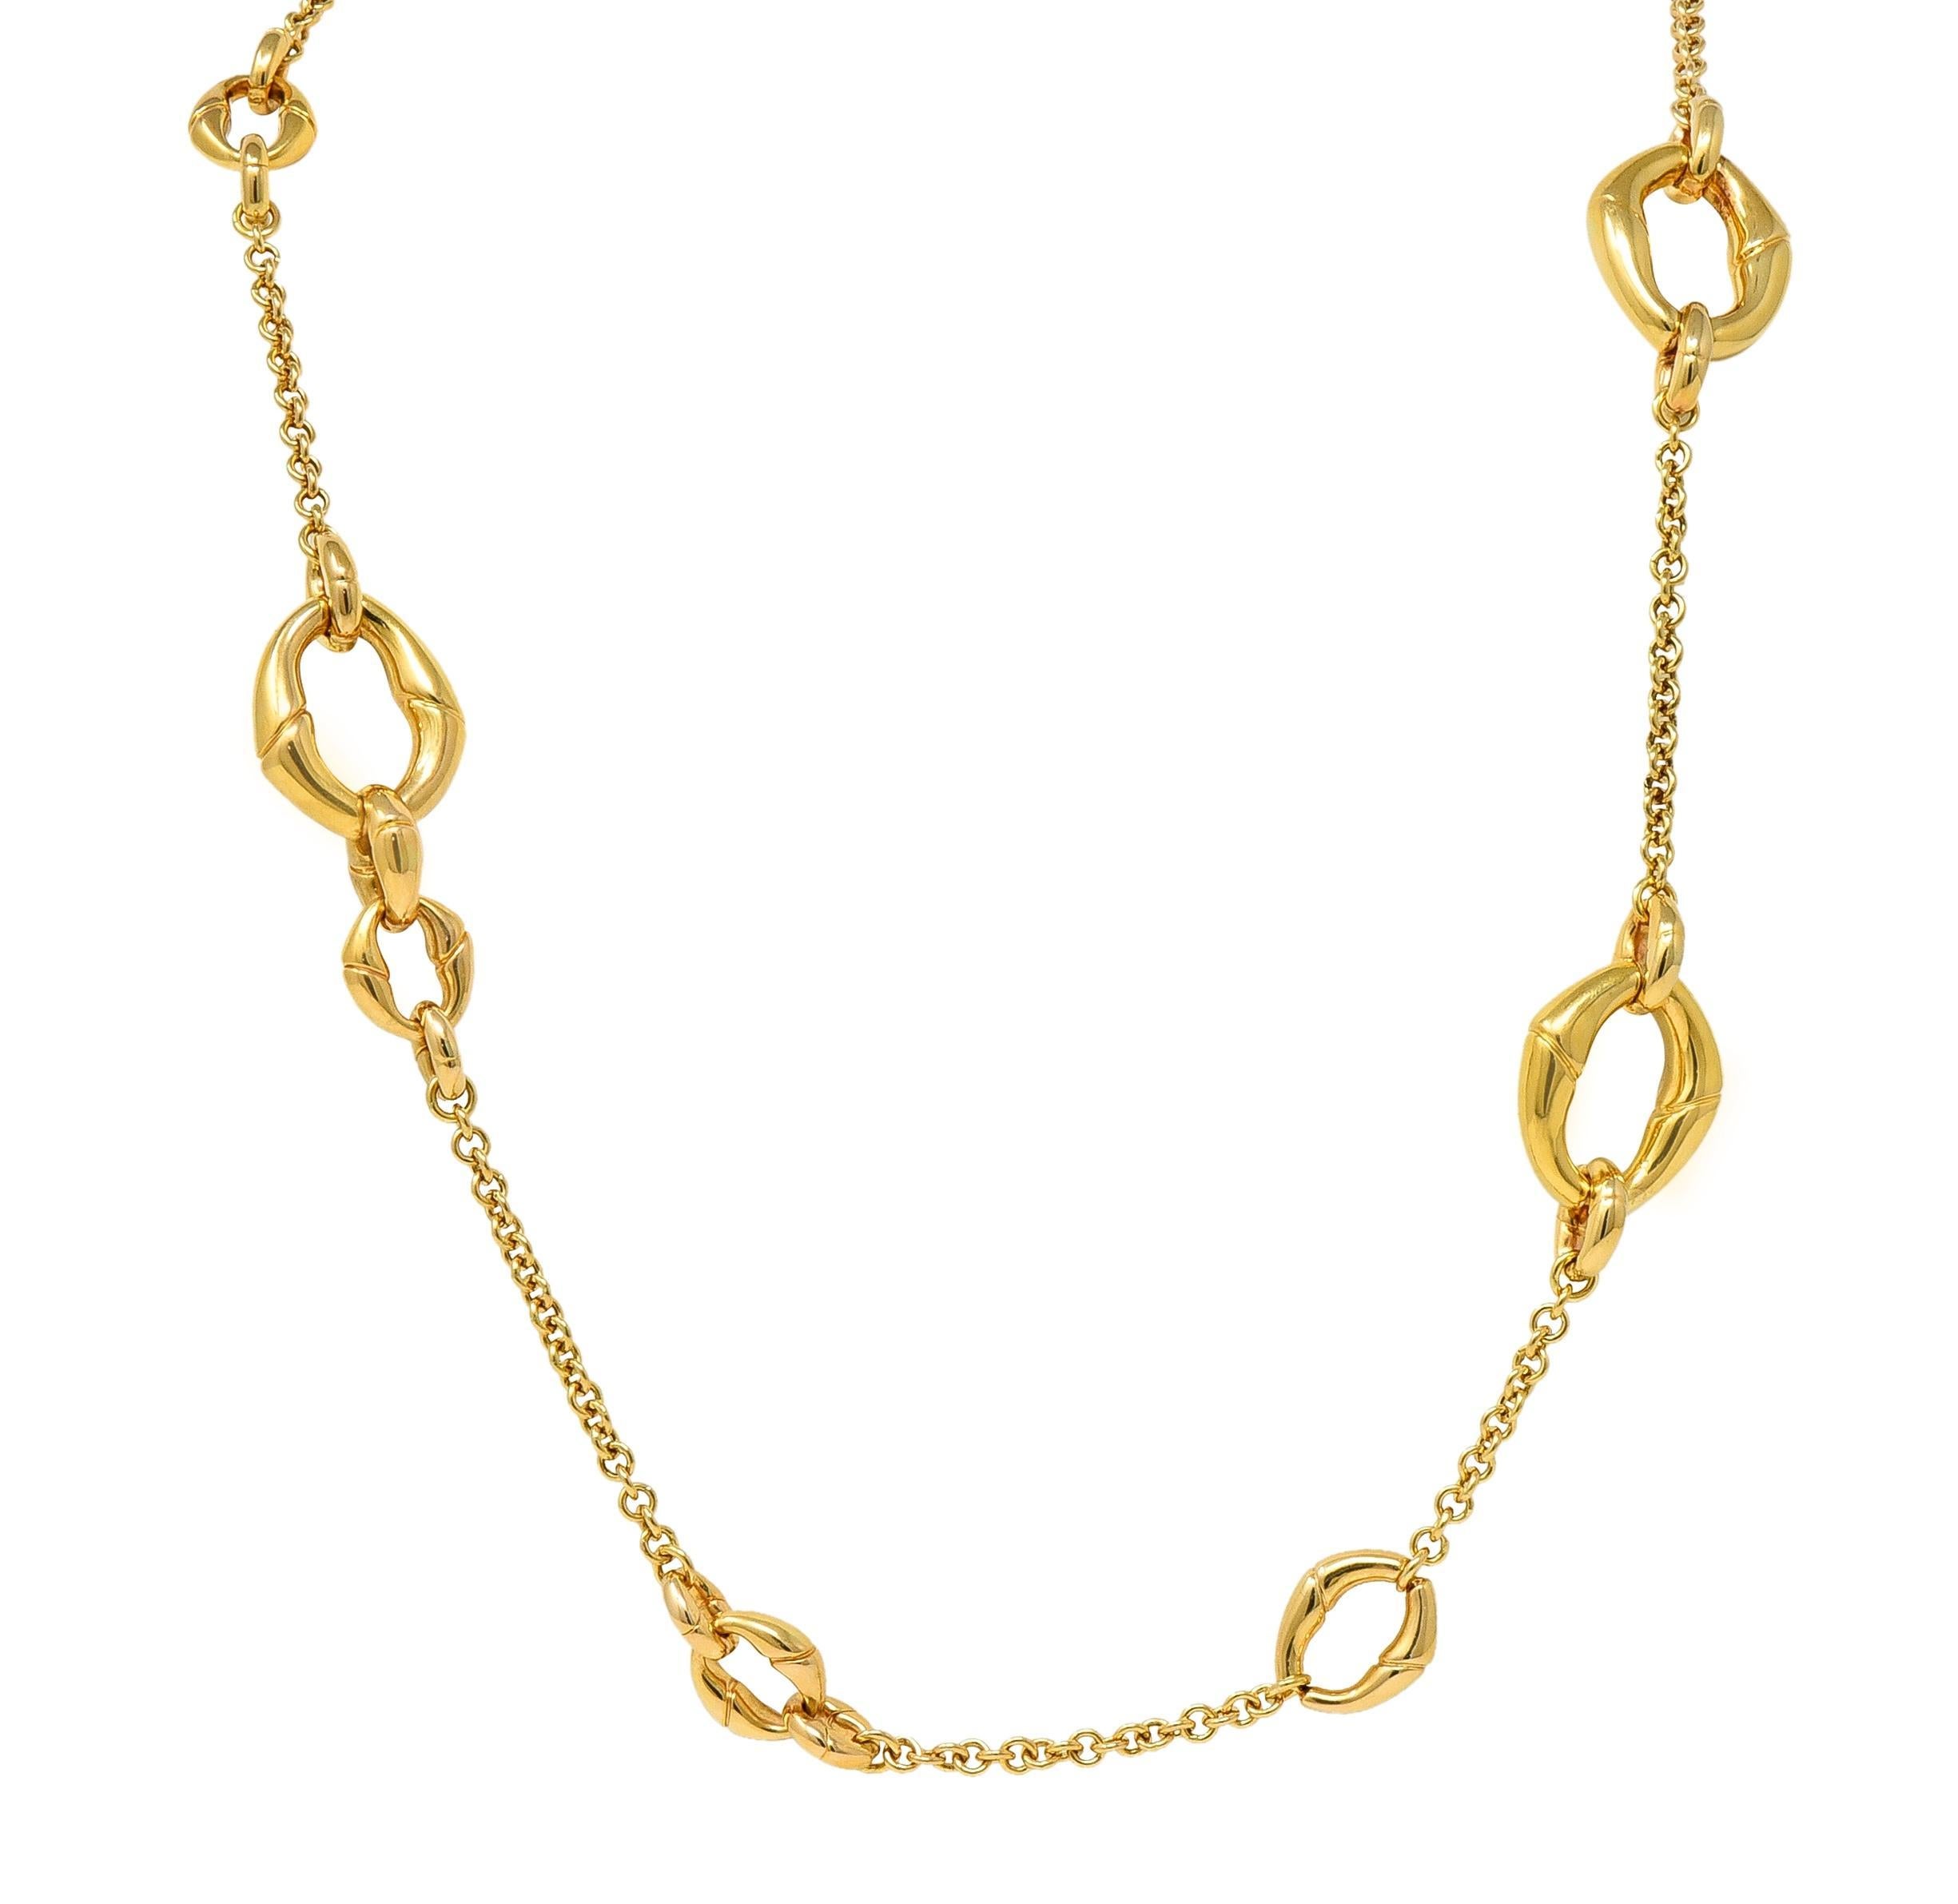 Gucci Contemporary 18 Karat Yellow Gold Bamboo Link Station Necklace For Sale 4